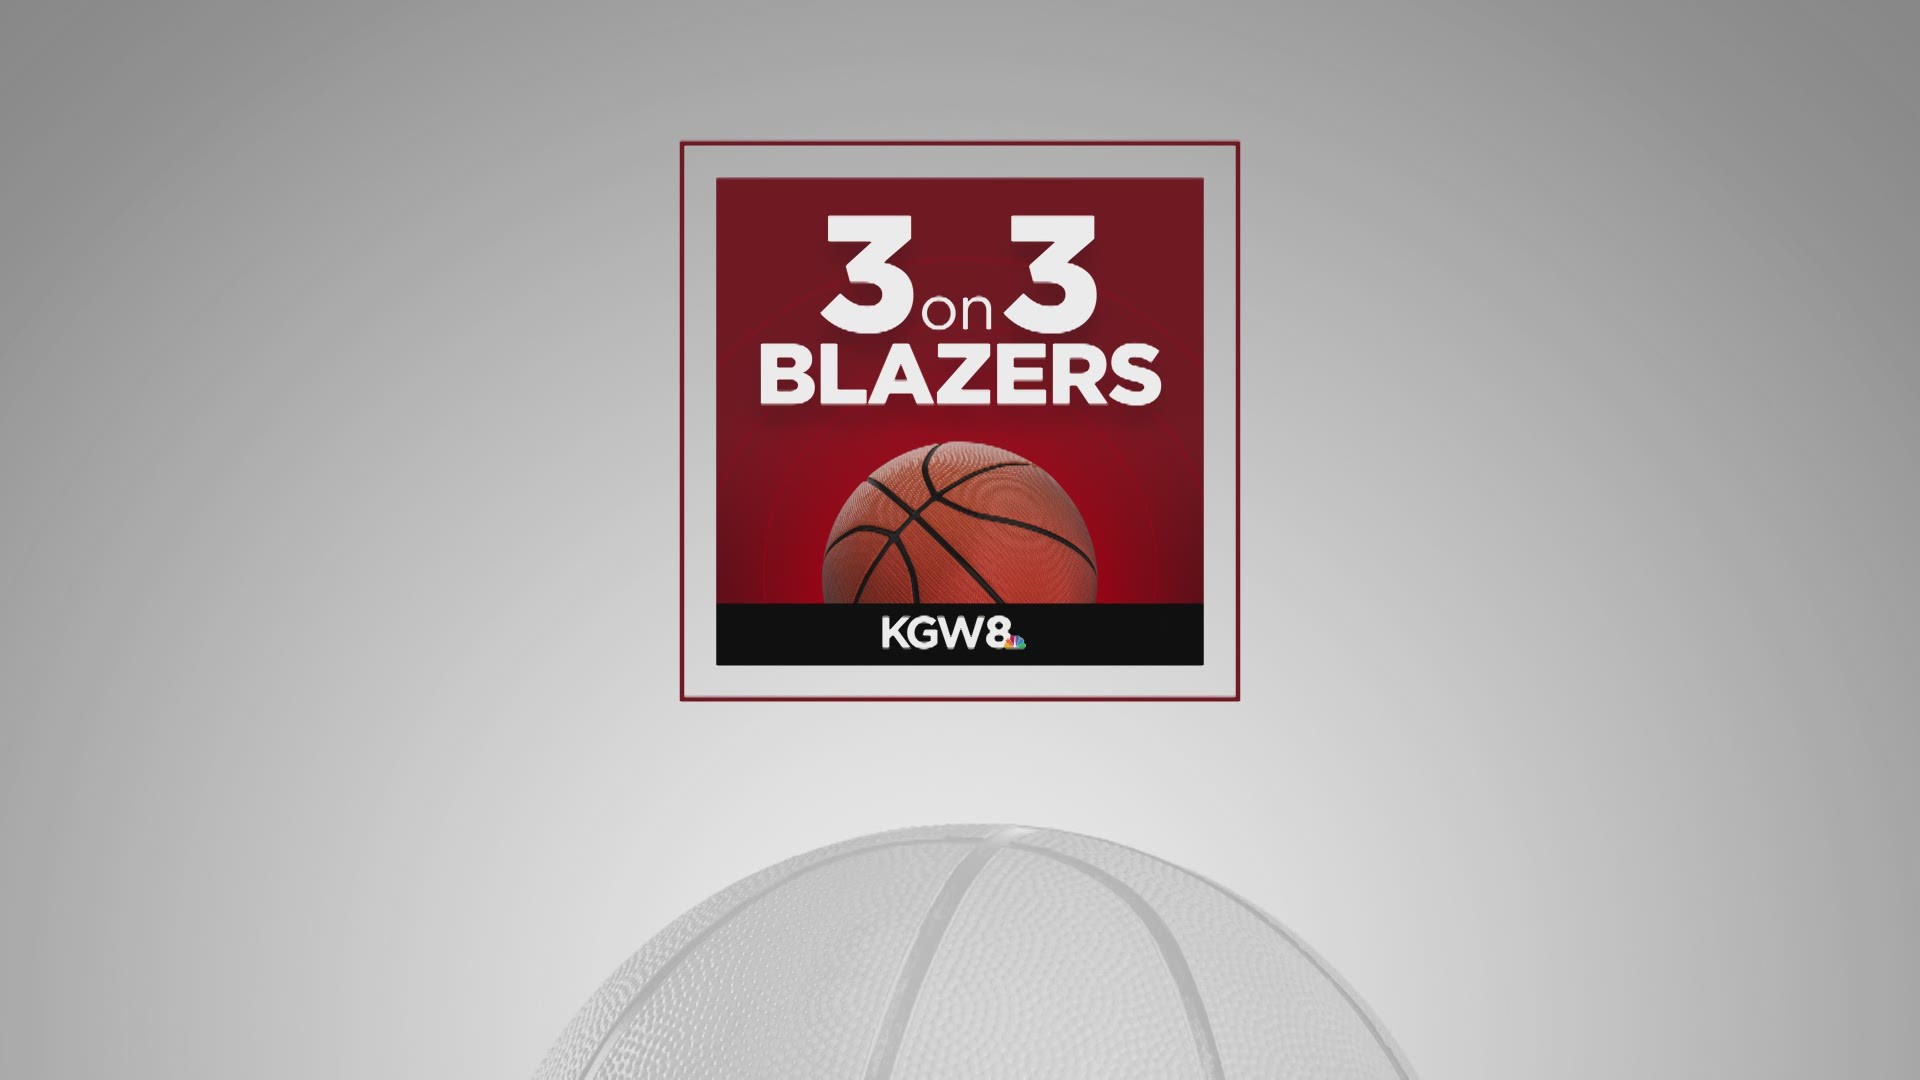 3-on-3 Blazers podcast with Orlando Sanchez and friends.